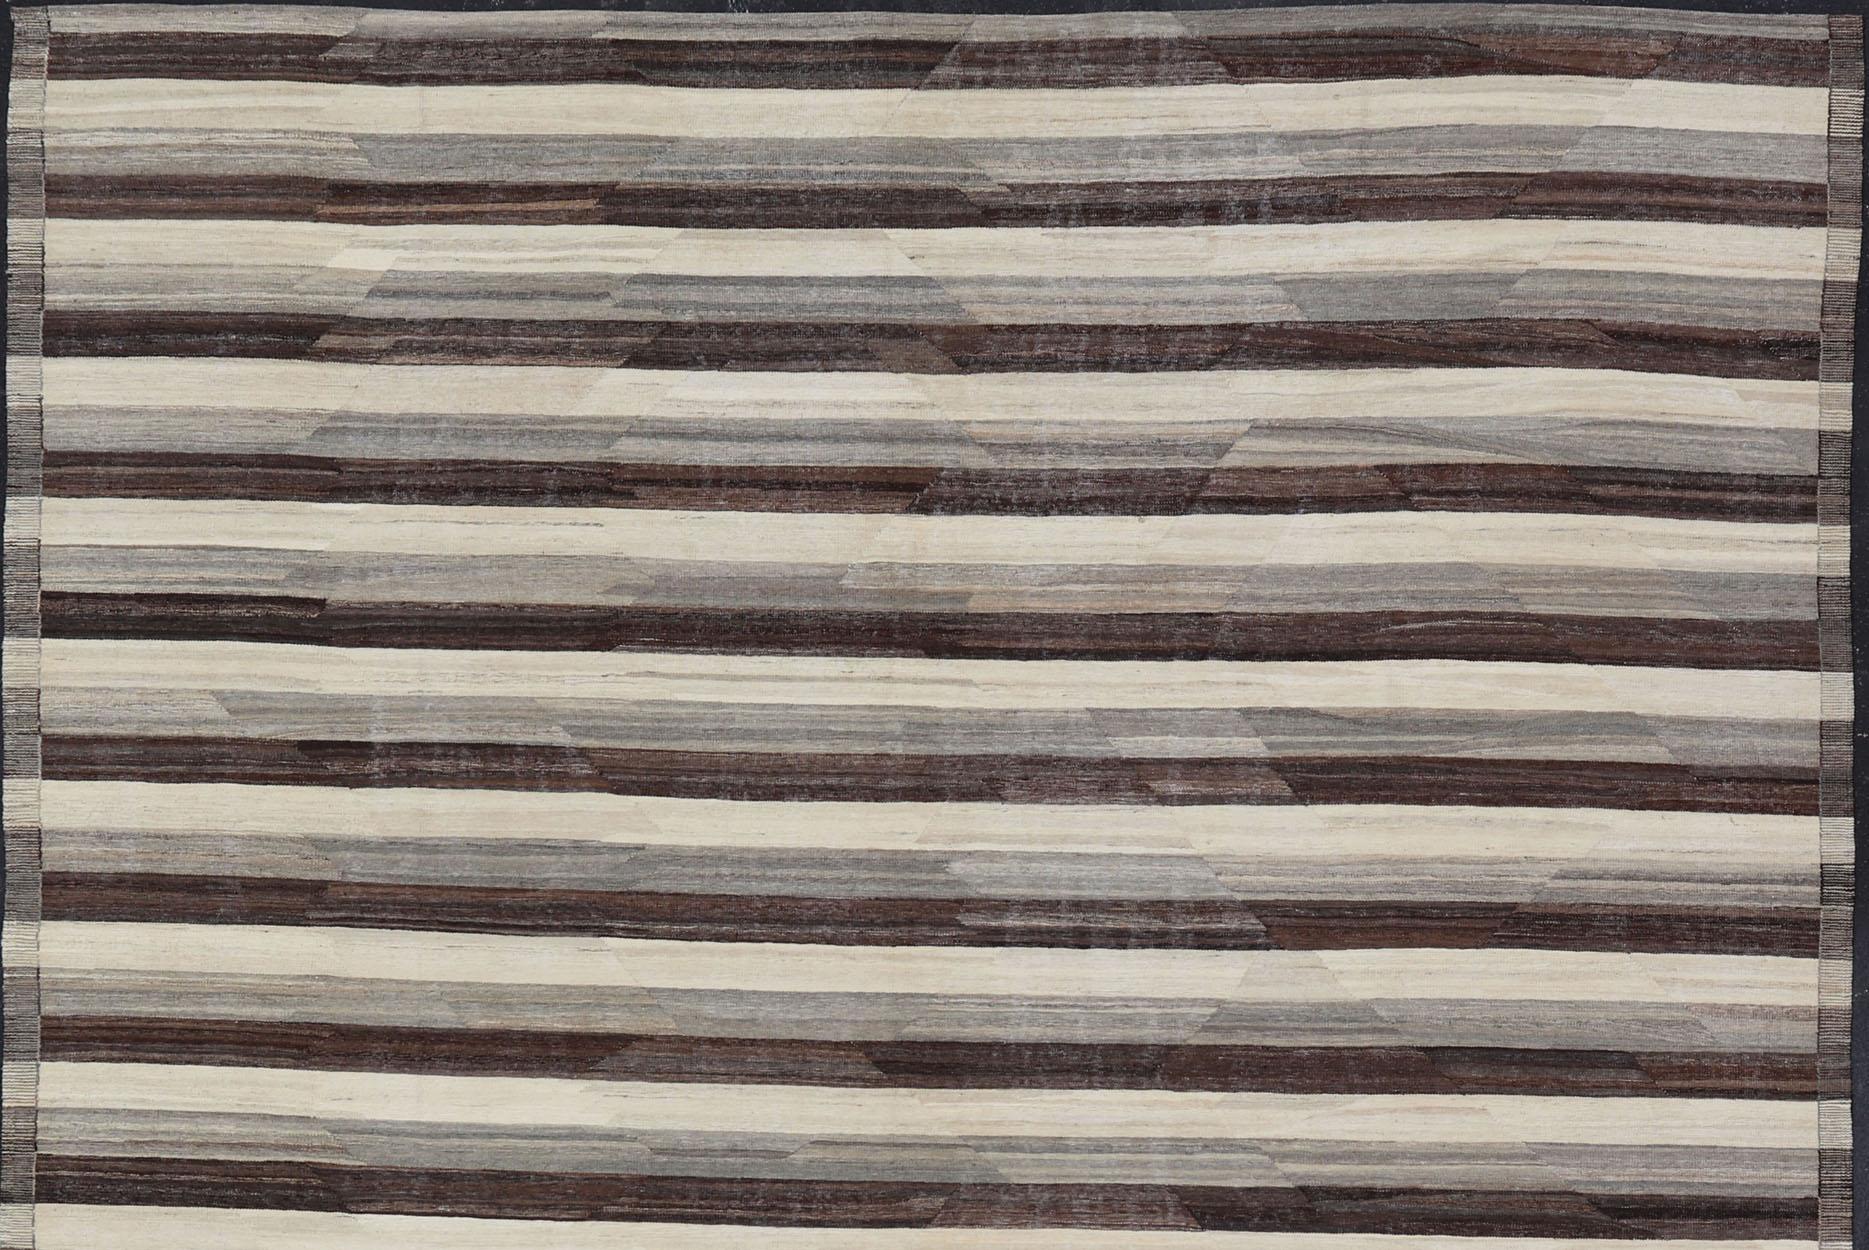 With a modern casual feel to a traditional Kilim pattern, this piece features a horizontal striped pattern, repeating in ivory, taupe, and dark brown. These complimentary colors and modestly modern design would suit a various range of interiors.